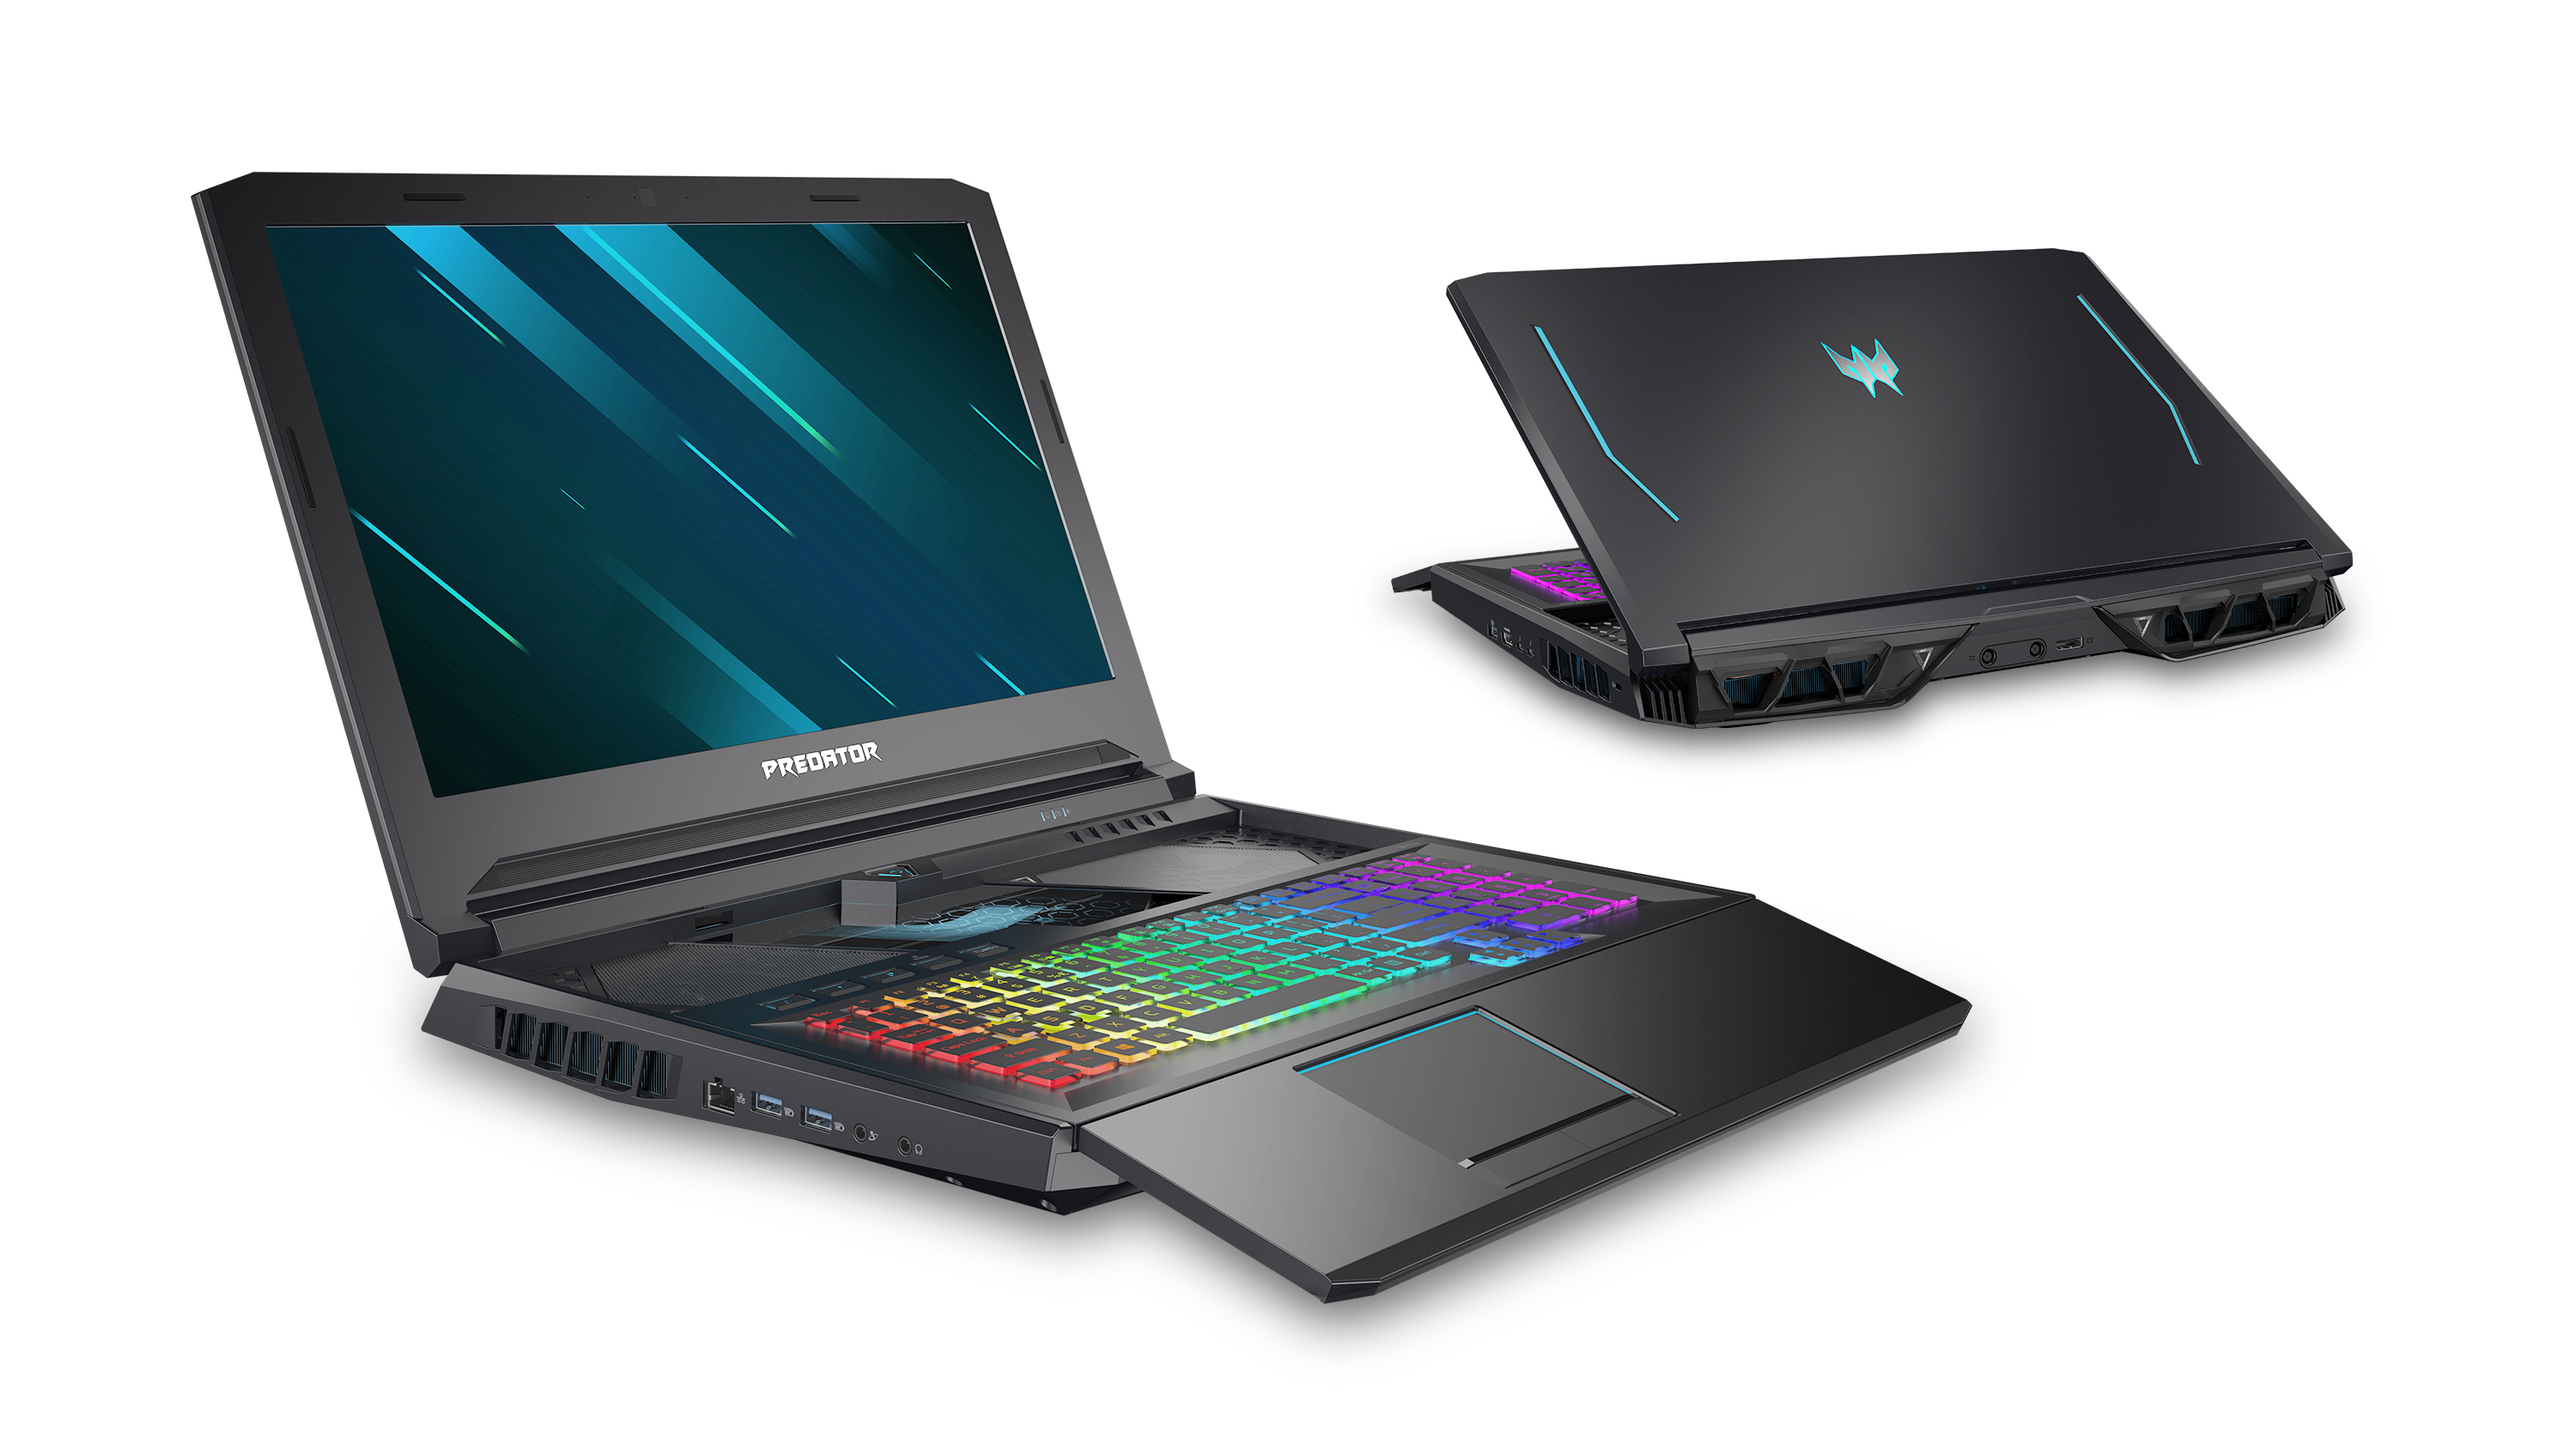 krystal blast Envision Acer Predator Helios 700: The innovative gaming laptop returns with up to  an Intel Core i9-10980HK, an NVIDIA GeForce RTX 2080 SUPER GPUs and faster  RAM - NotebookCheck.net News